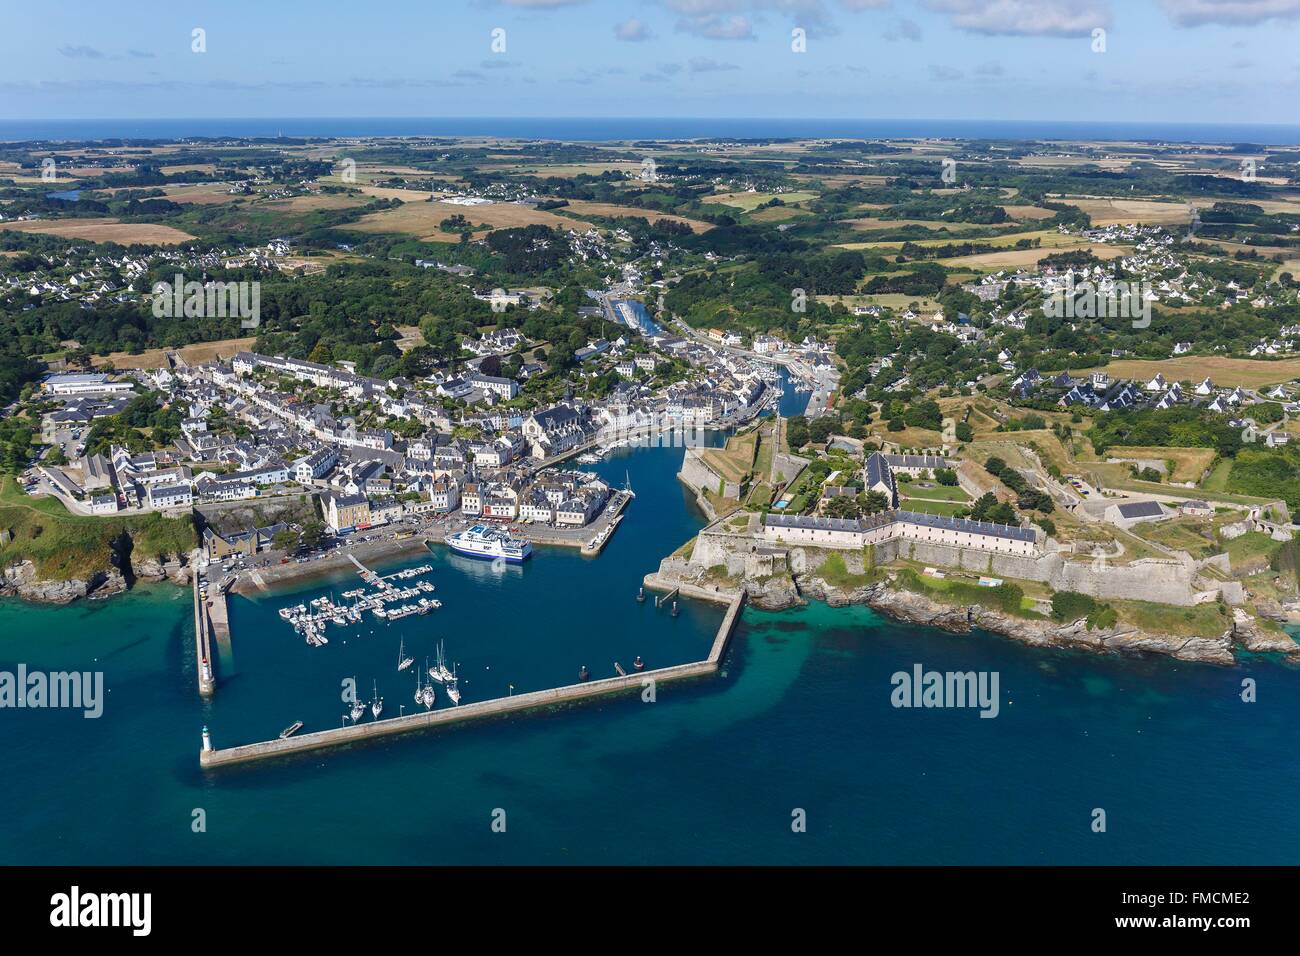 France, Morbihan, Belle Ile, Le Palais, the town, the habour and the Citadel (aerial view) Stock Photo